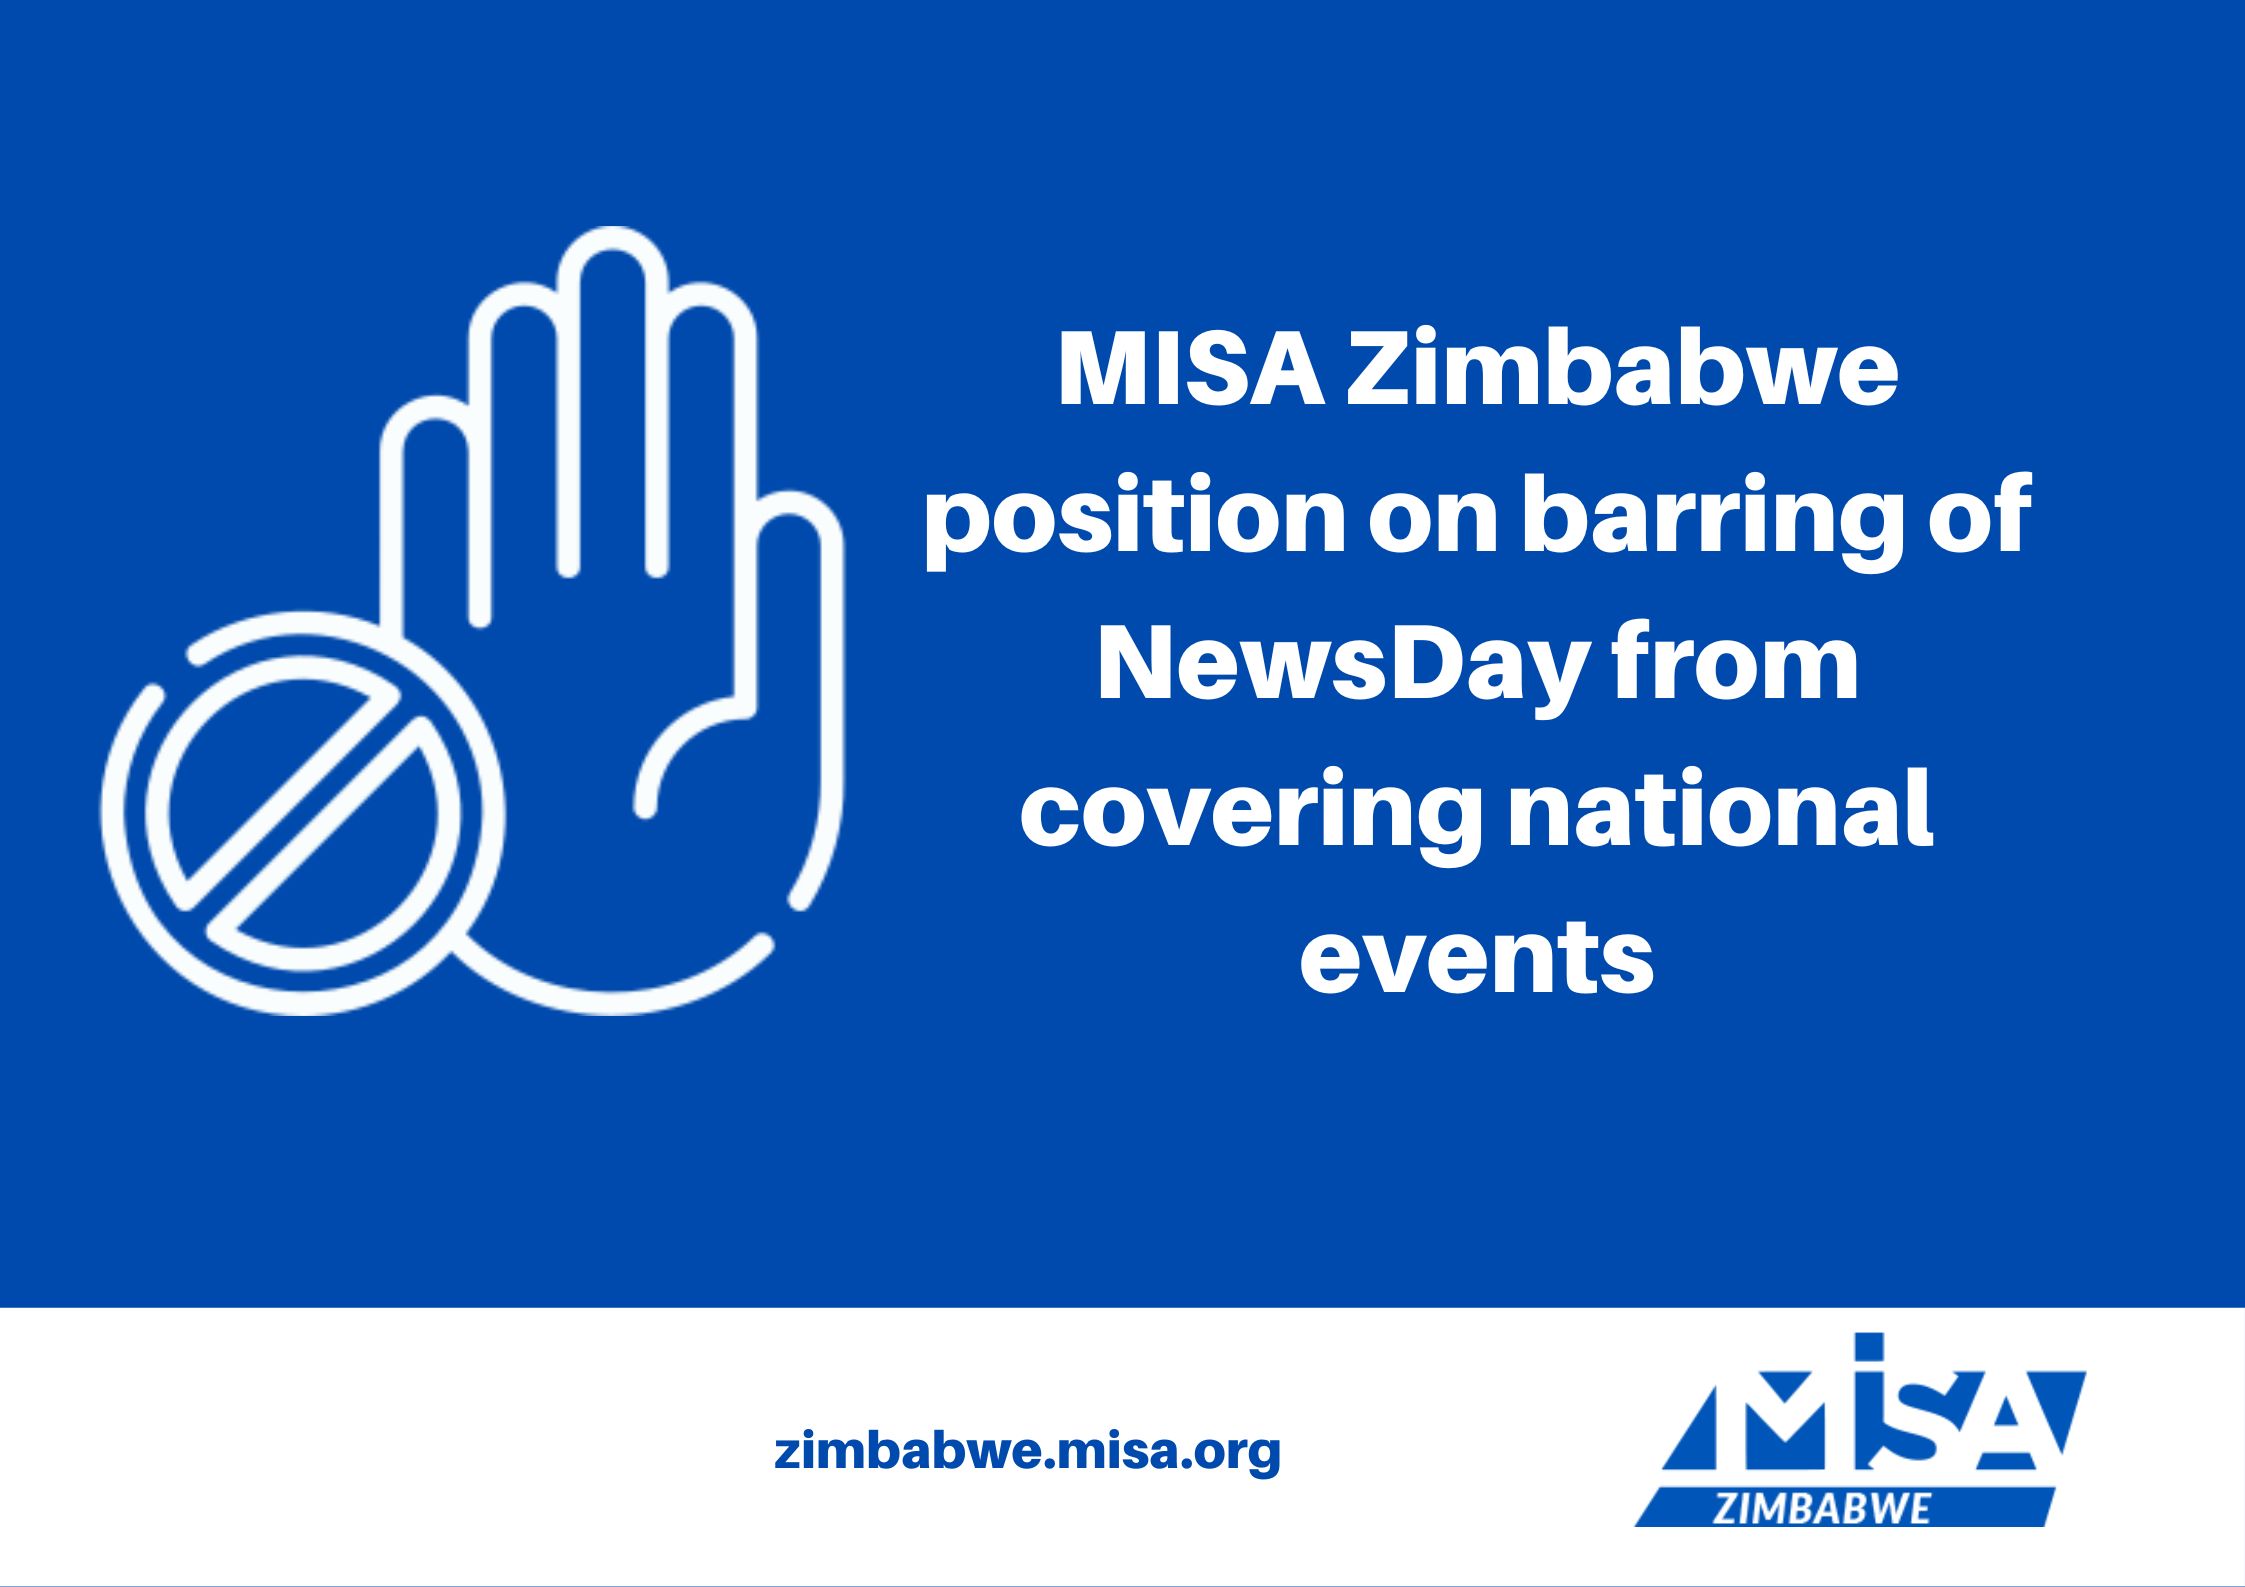 MISA Zimbabwe position on barring of NewsDay from covering national events